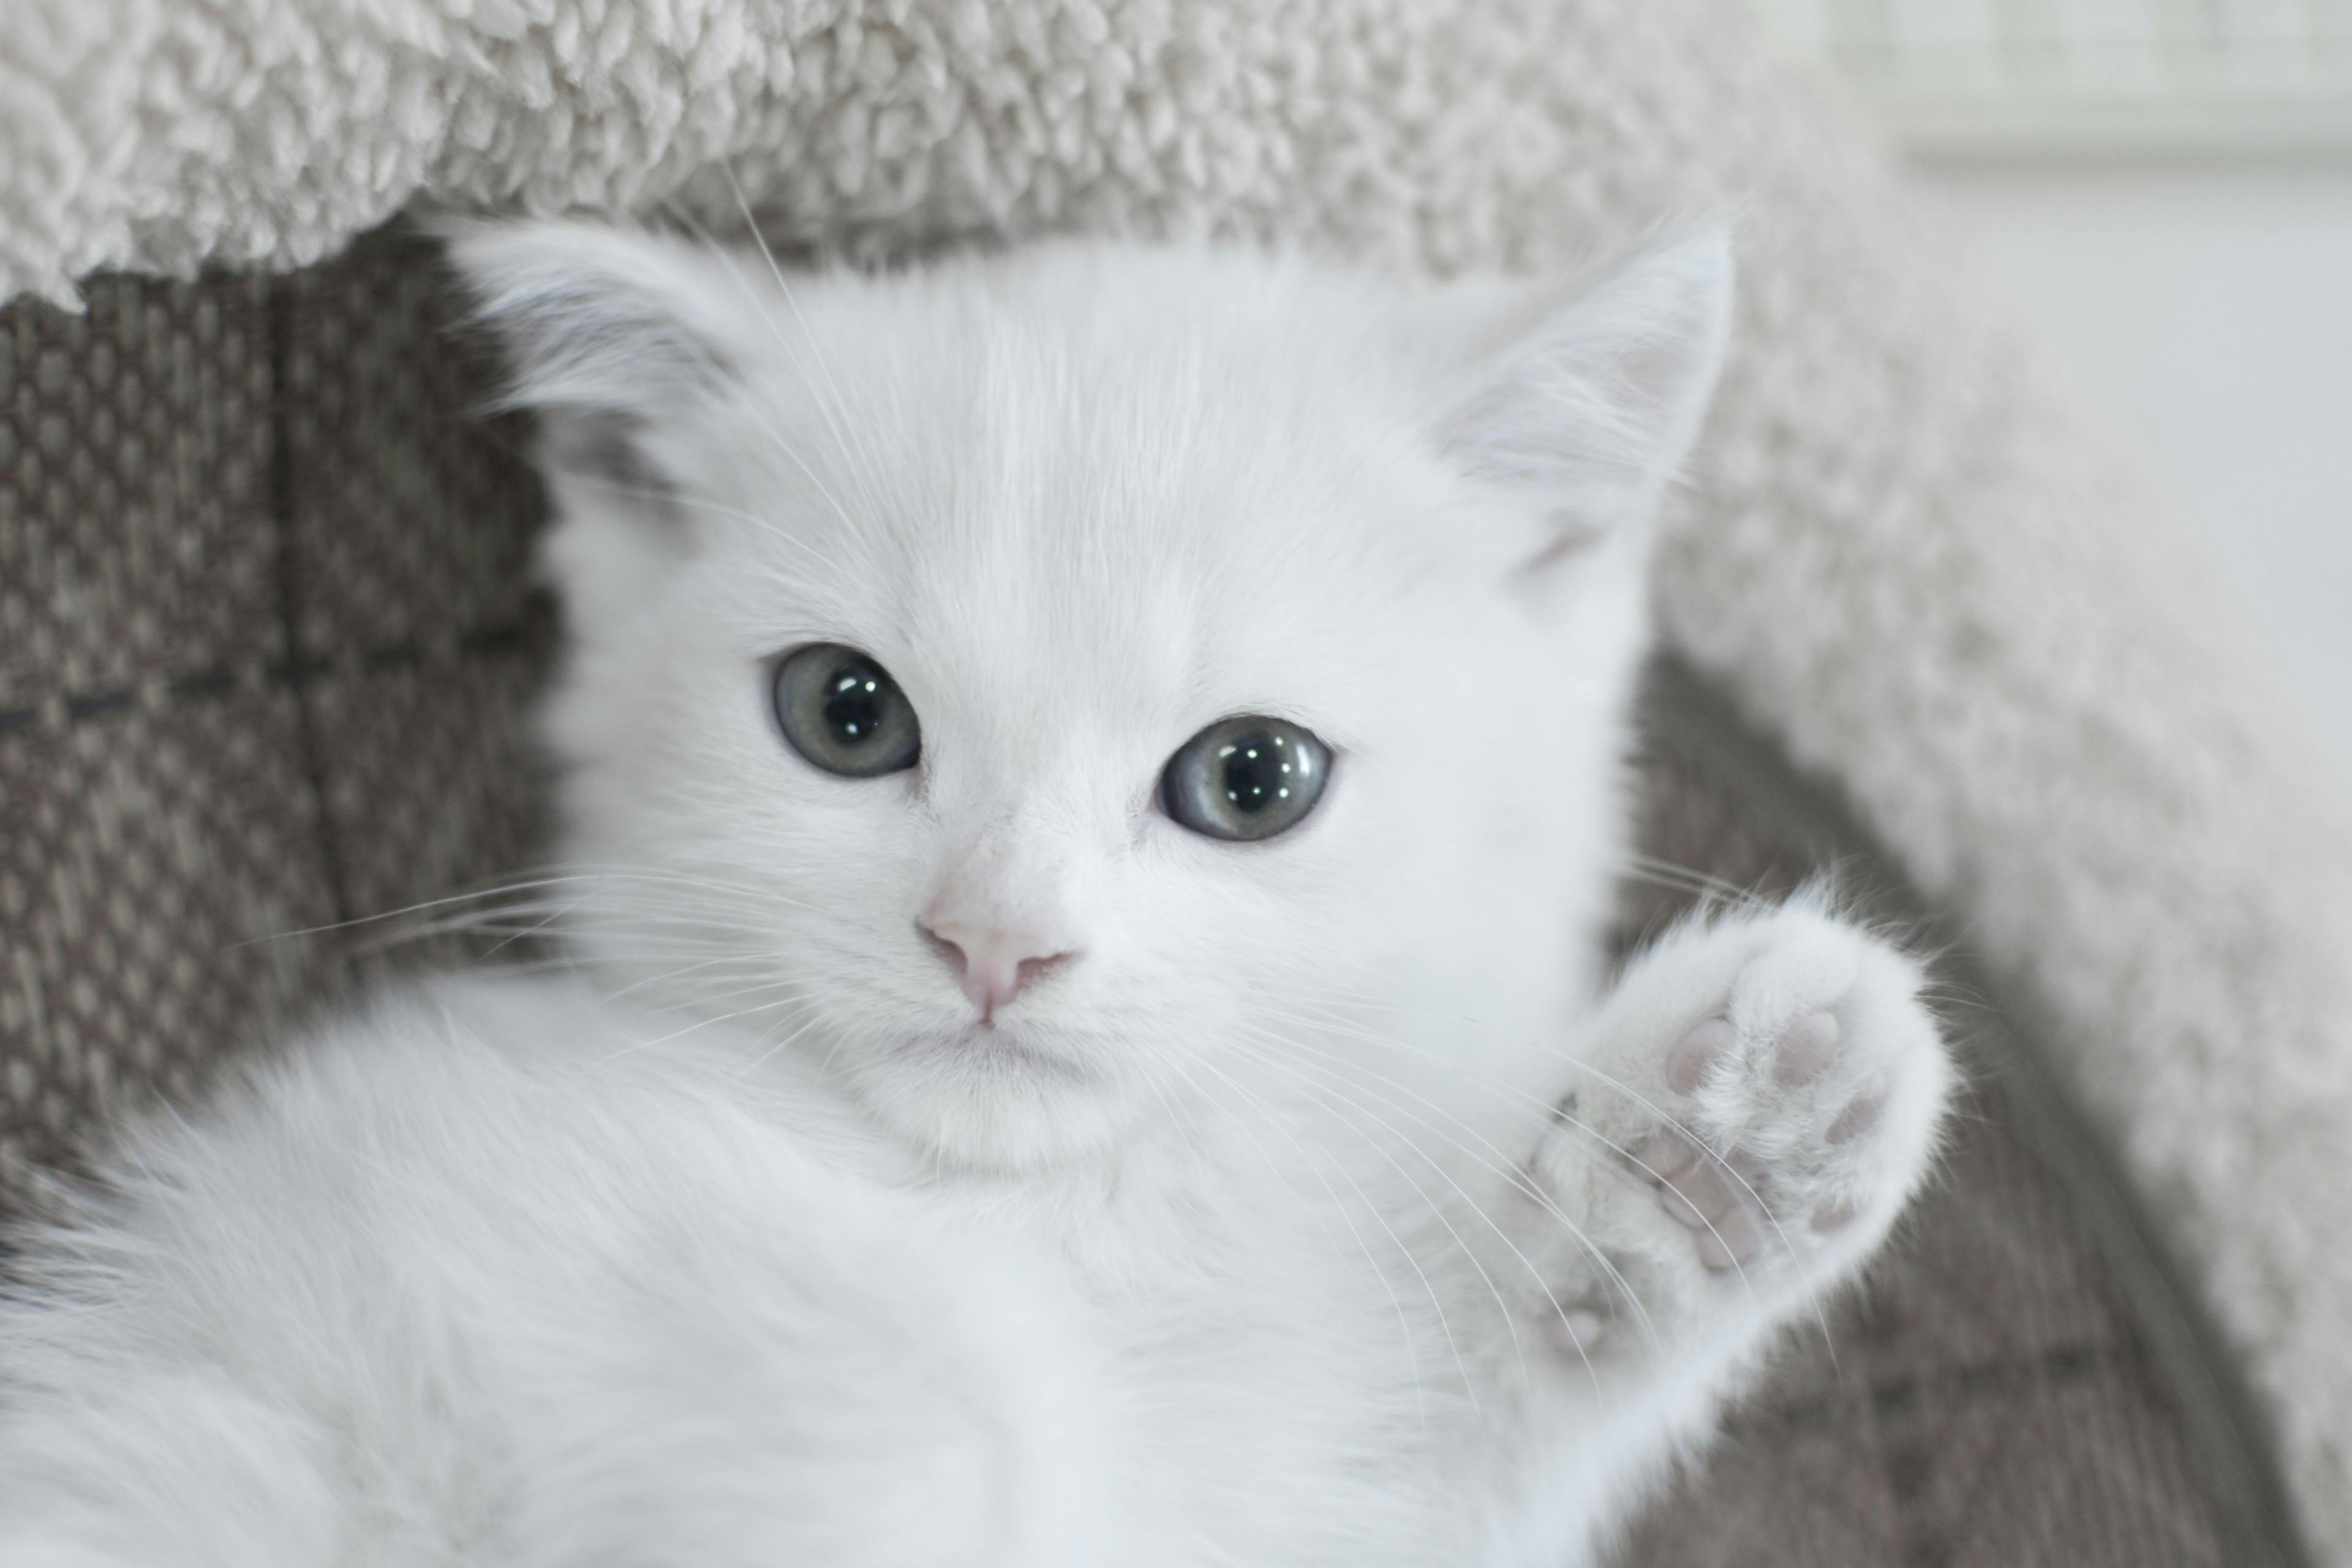 Why Are Cats So Cute: 🐈Factors Behind Feline Cuteness